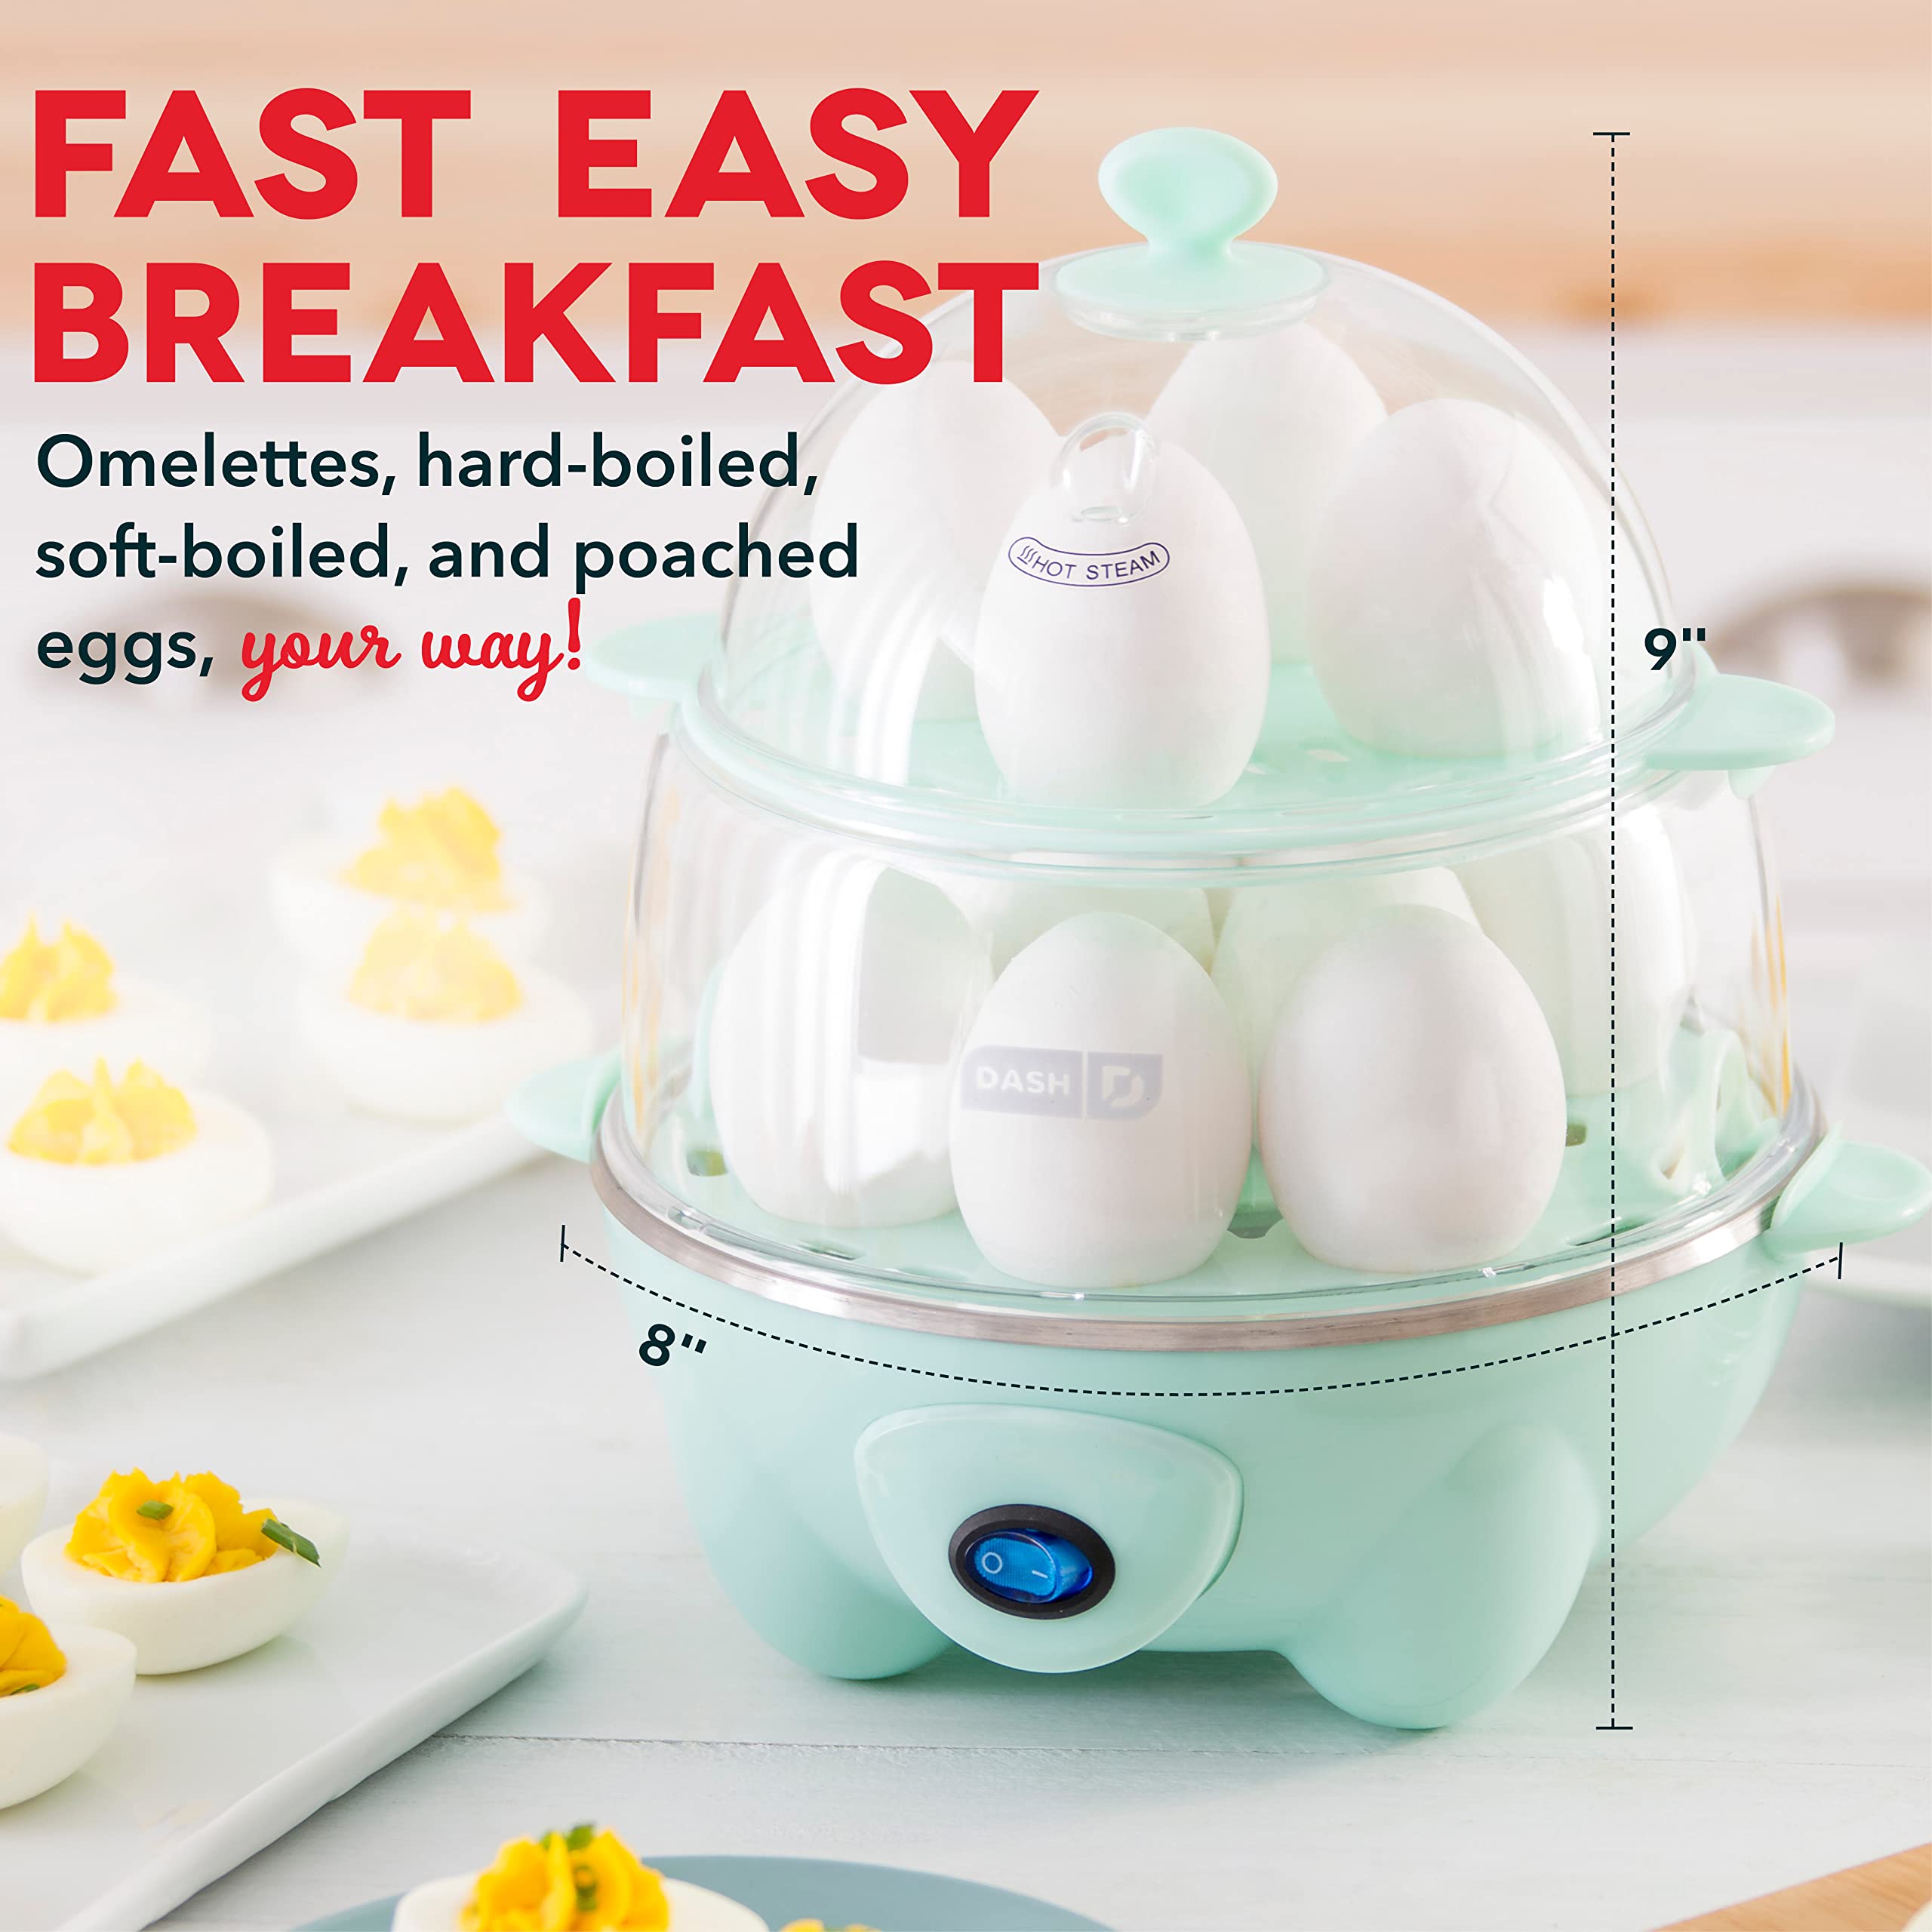 DASH Deluxe Rapid Egg Cooker for Hard Boiled, Poached, Scrambled Eggs, Omelets, Steamed Vegetables, Dumplings & More, 12 capacity, with Auto Shut Off Feature - Aqua